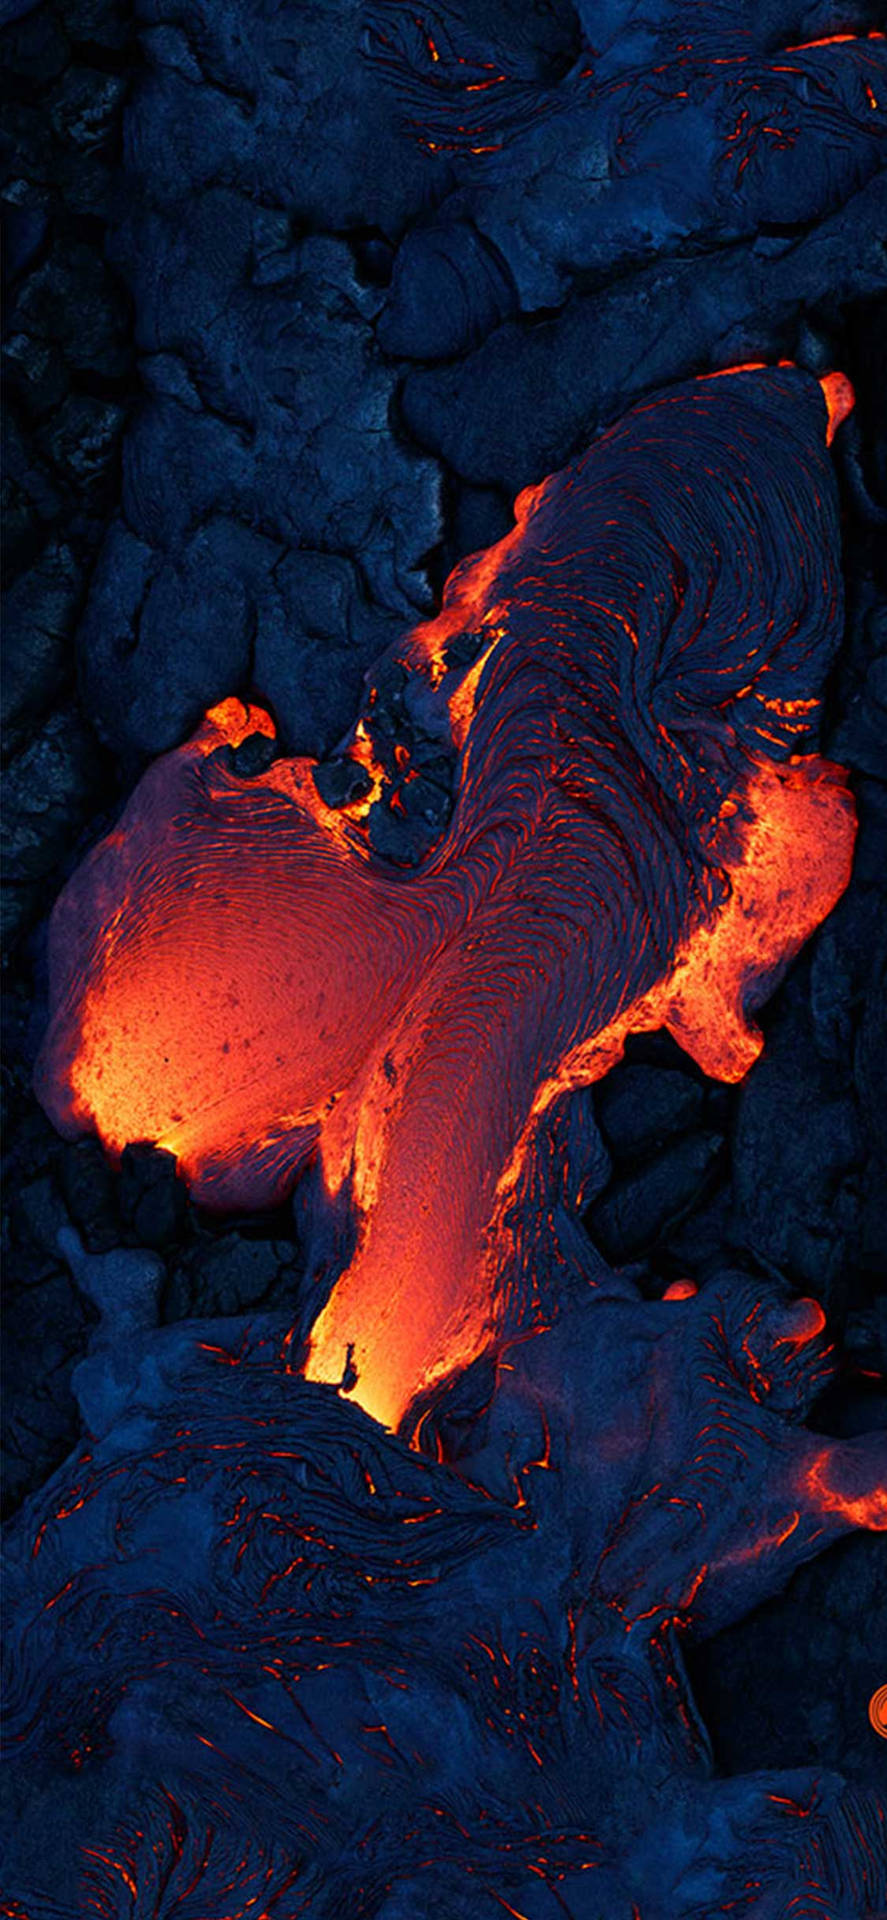 Vibrant OLED Display of Molten Lava on iPhone Wallpaper